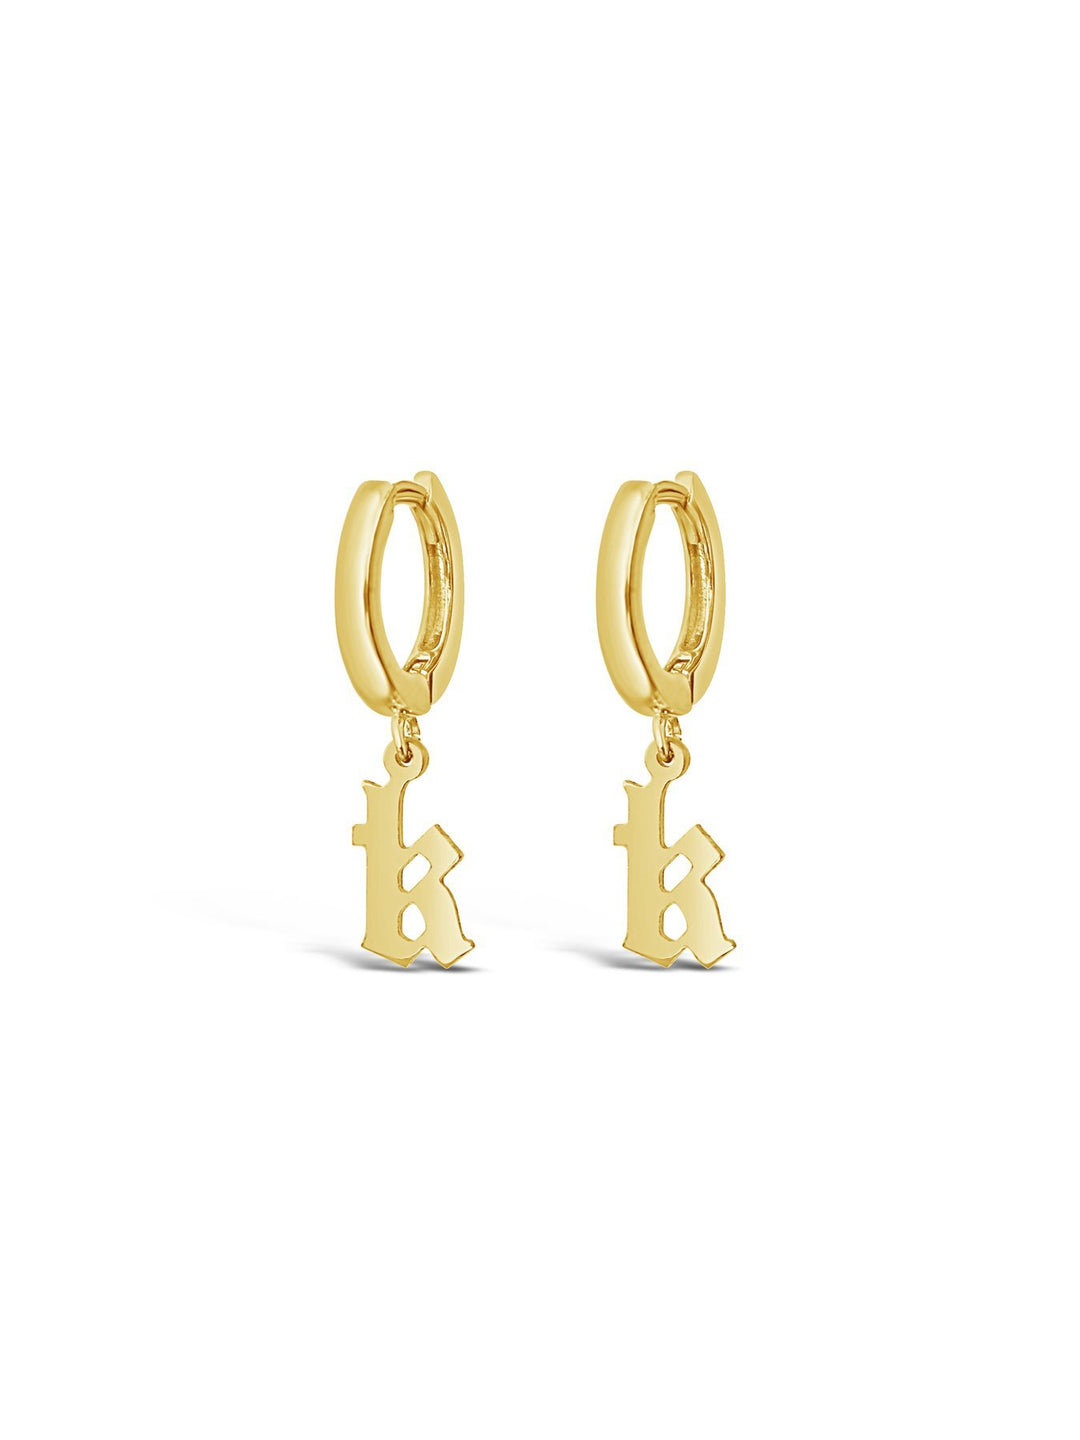 Gothic Initial Earrings - Lucky Eleven Jewellery